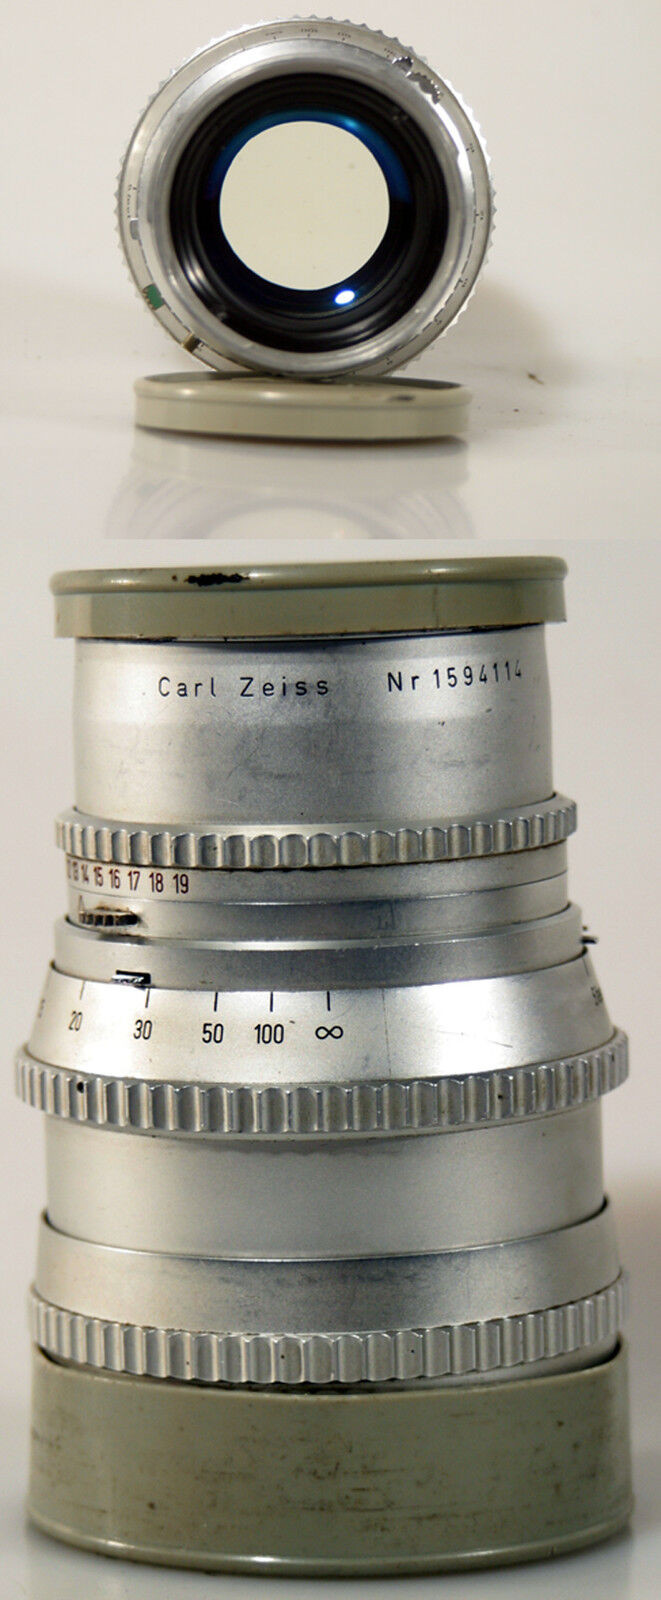 HASSELBLAD 150MM F4 CARL ZEISS LENS CLASSIC CHROME